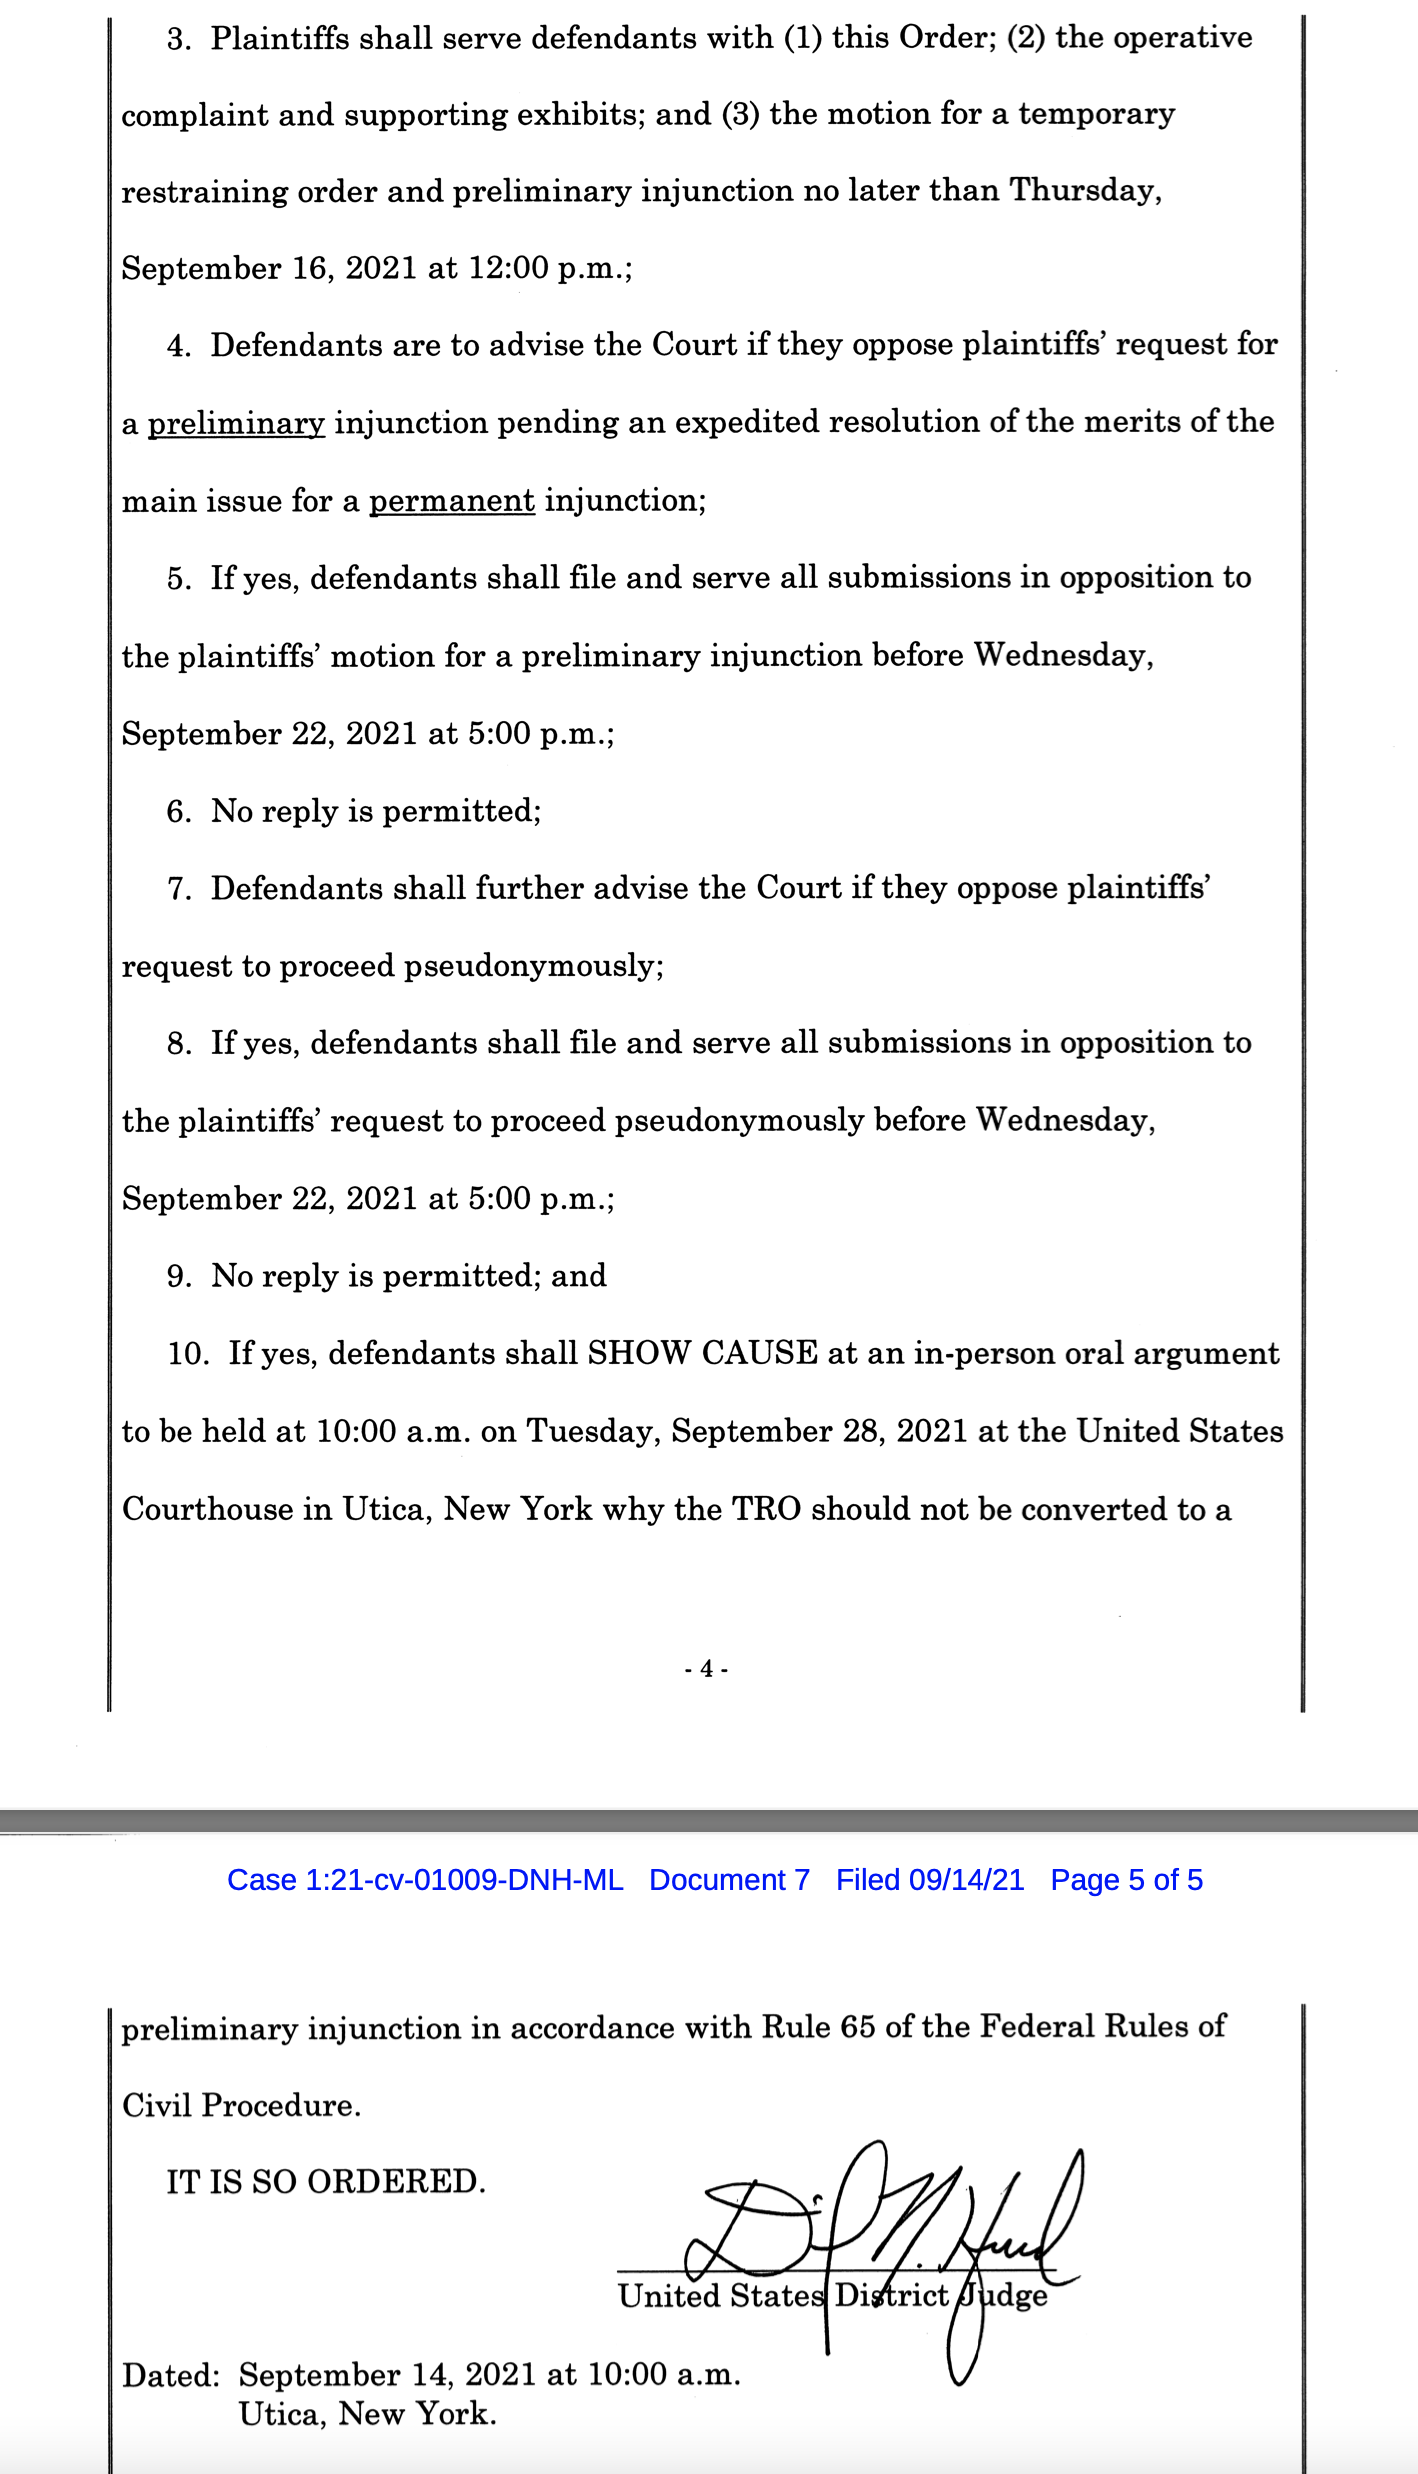 Image of temporary restraining order text